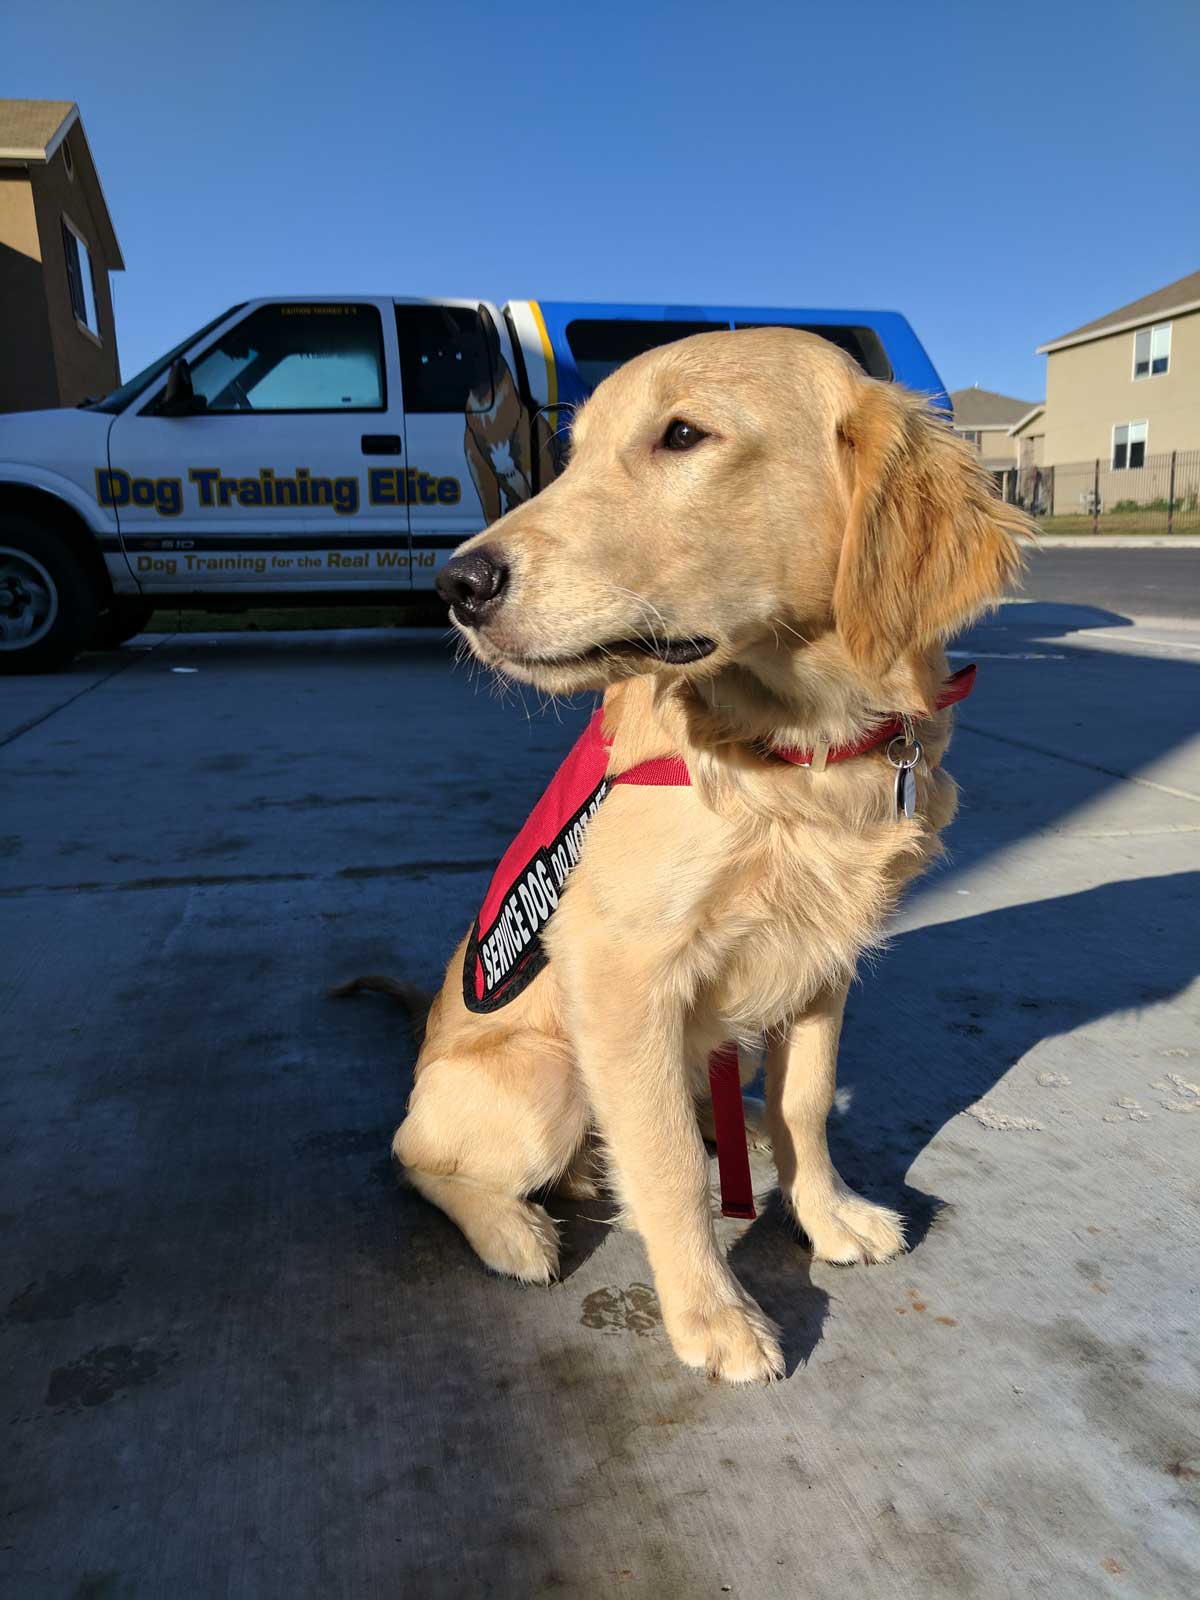 Dog Training Elite Colorado Springs is proud to have the highest rated service dog training programs near you in Colorado Springs.